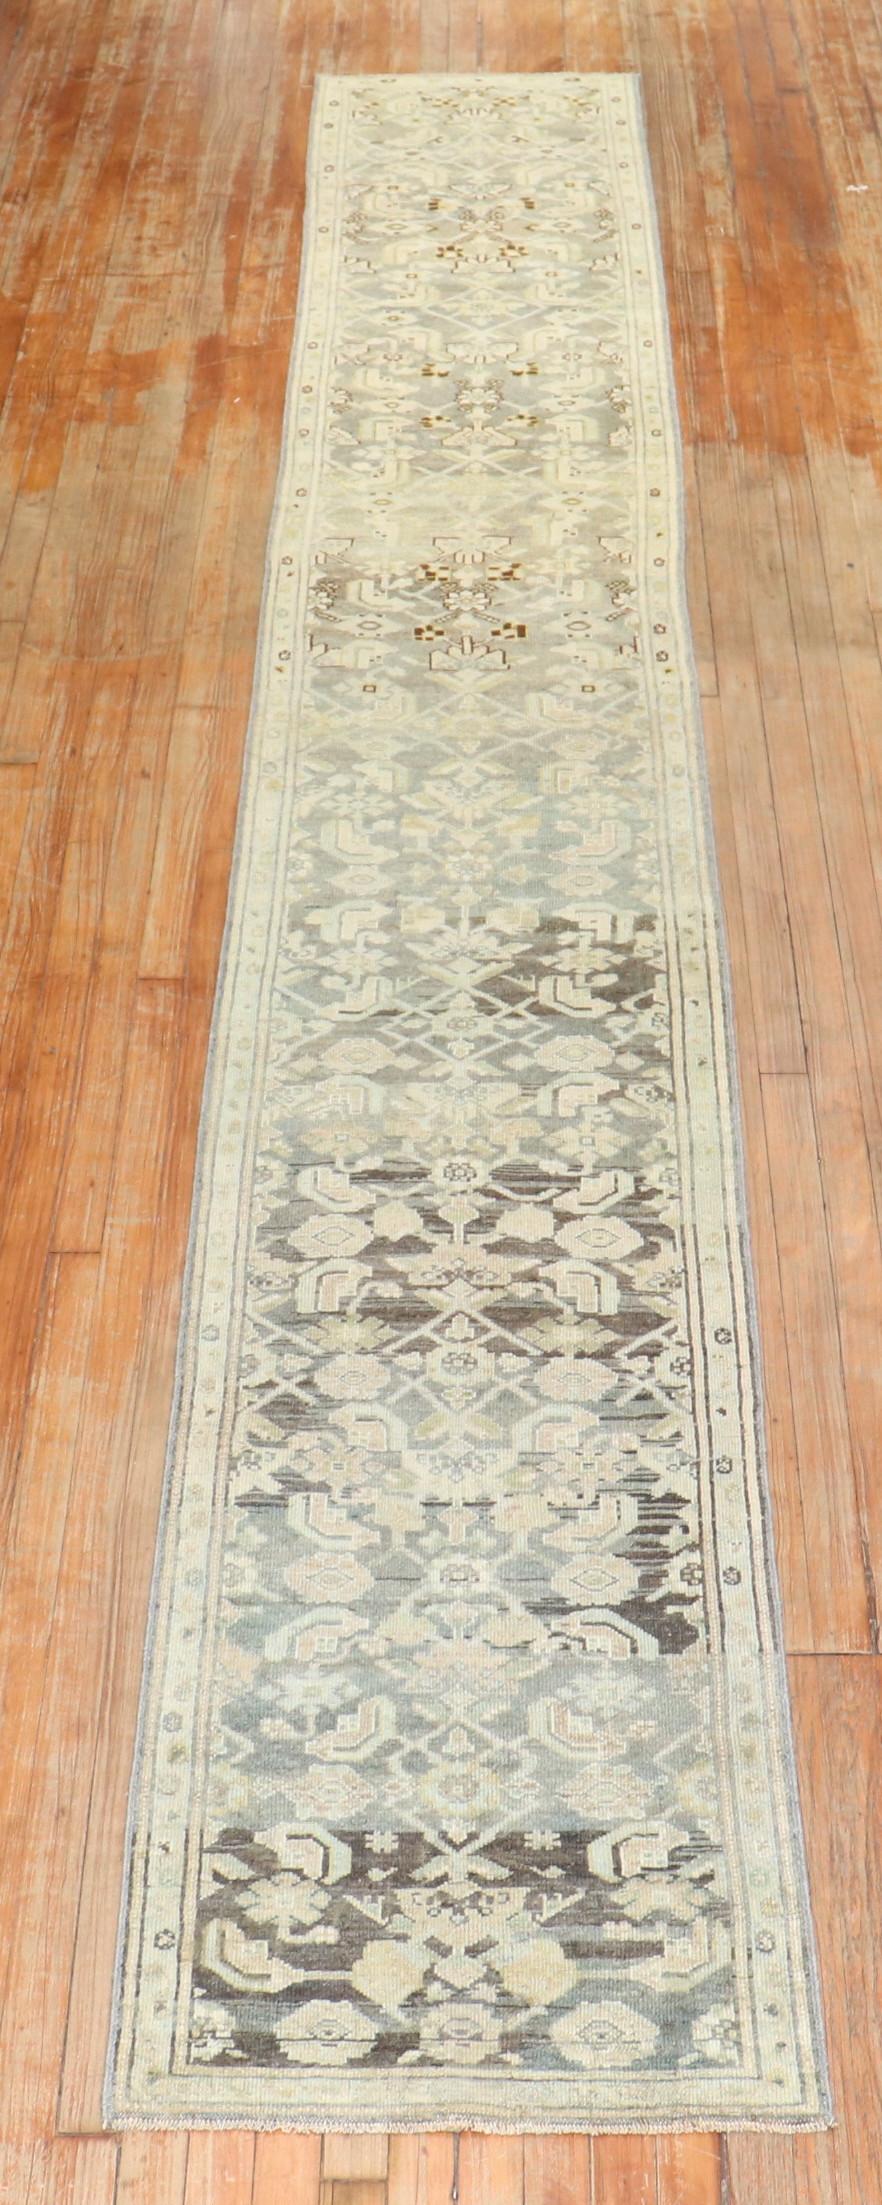 An early 20th century skinny Decorative original size Persian Malayer long runner. 

Measures: 2'' x 15'.